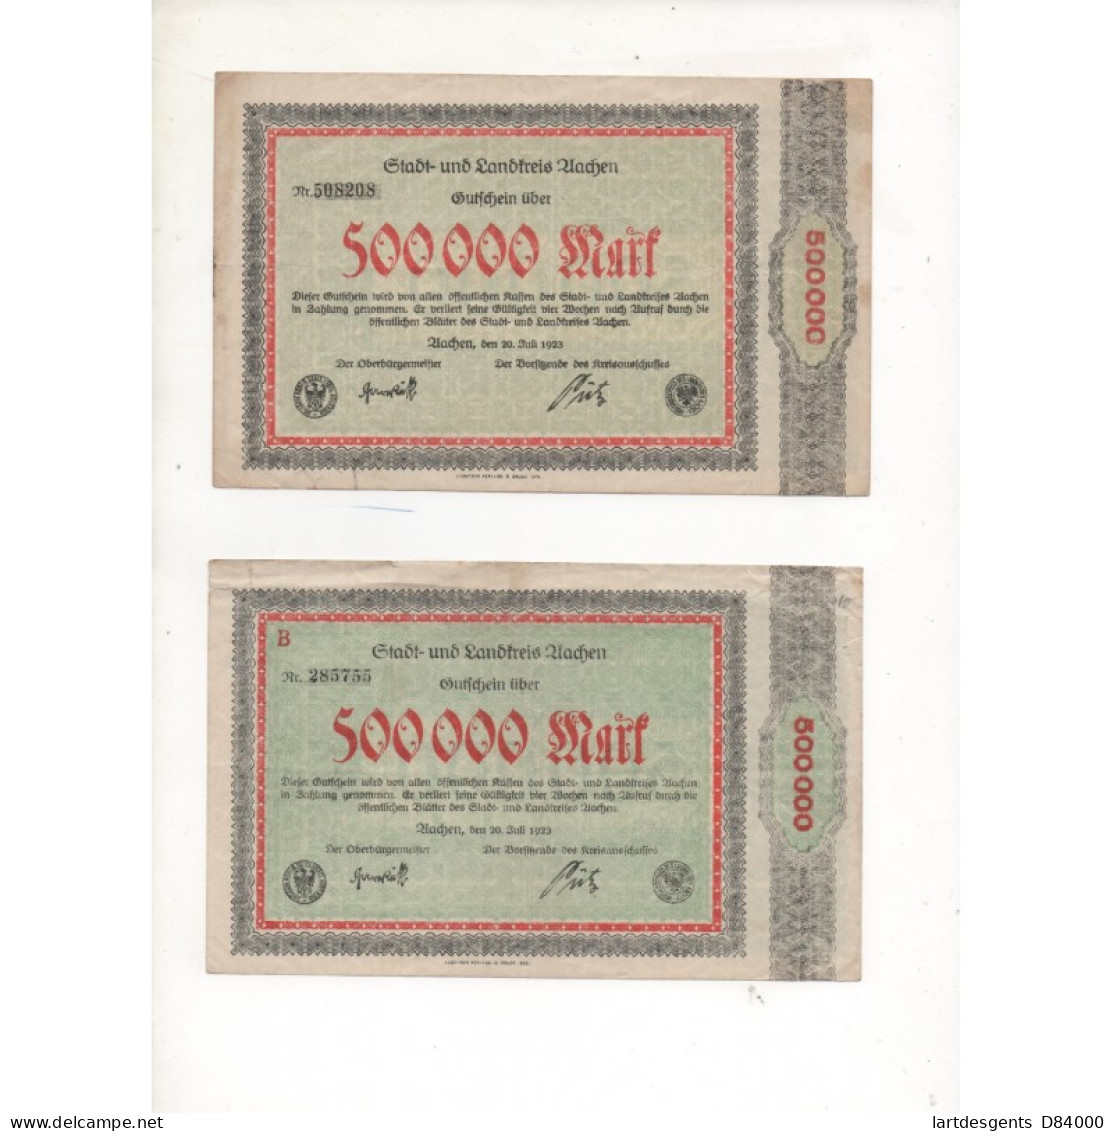 NOTGELD - AACHEN - 6 Different Notes - 1923 (A009) - [11] Local Banknote Issues